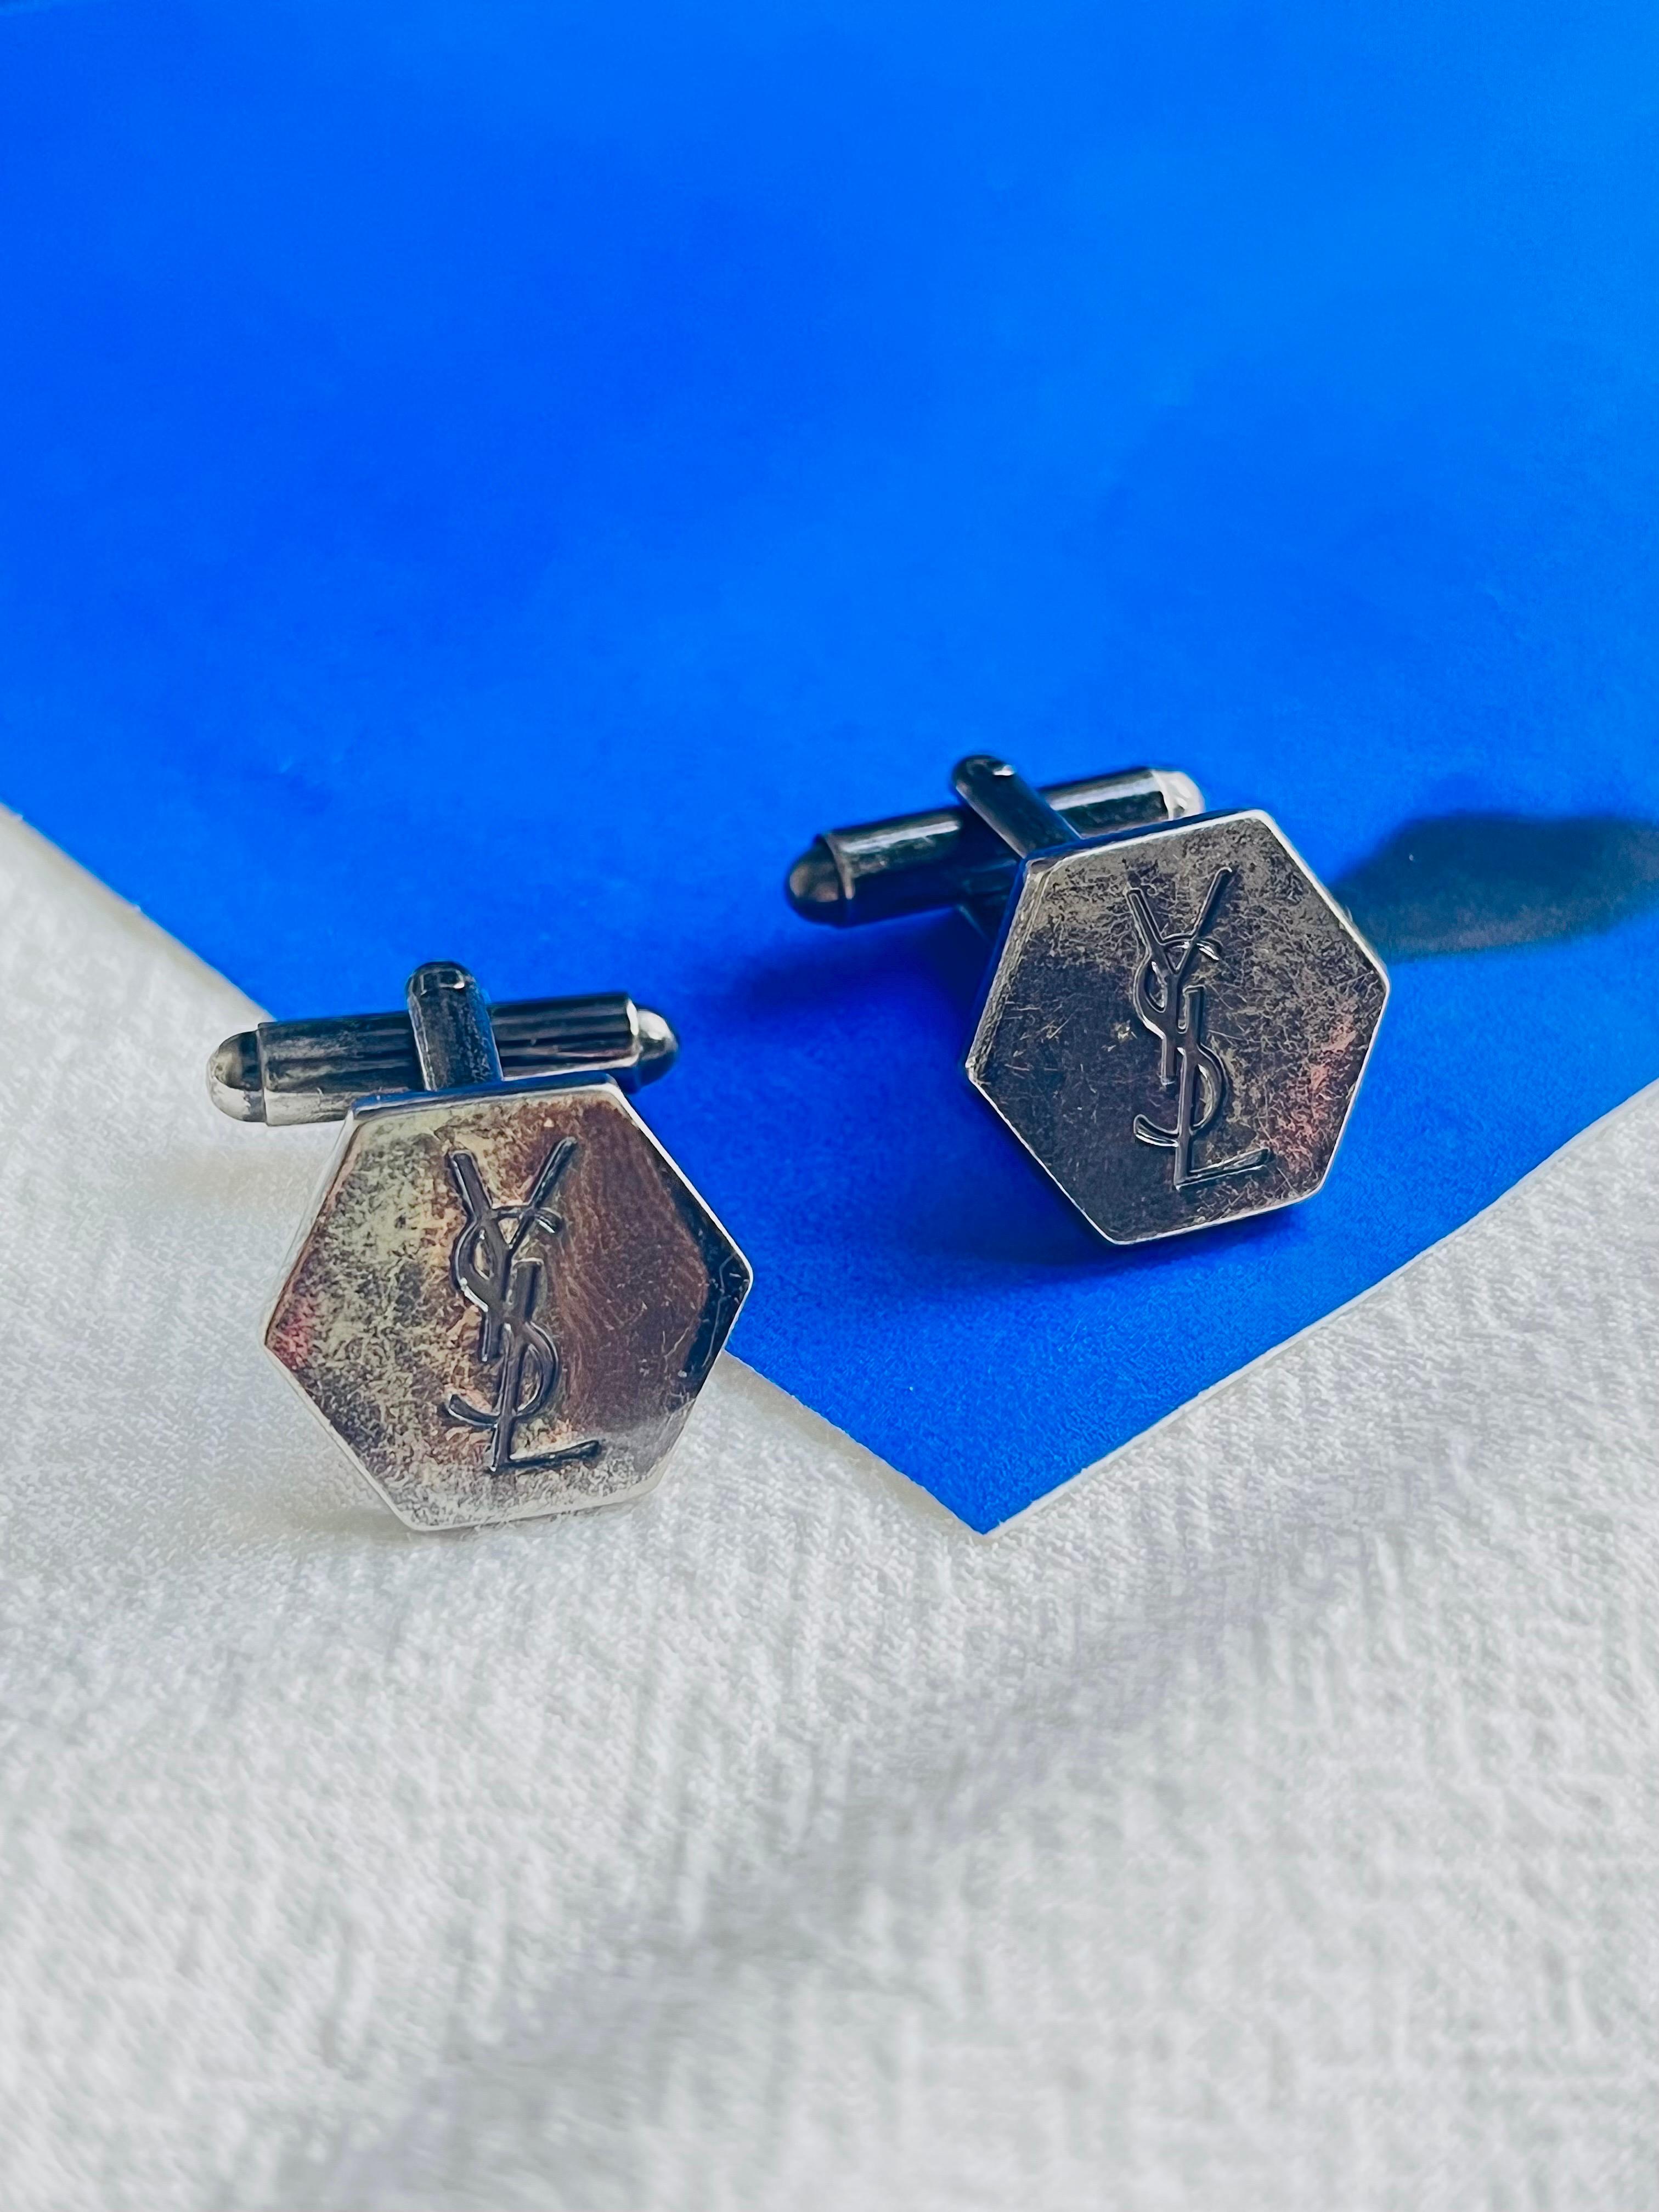 Yves Saint Laurent Logo Hallmark YSL Monogram Hexagon Black Silver Cufflinks

Good condition. Some Light scratches and colour loss, but still very good to wear.

Hexagon pendant size: 1.5*1.7 cm.

Weight: 6 g/each.

_ _ _

Great for everyday wear.